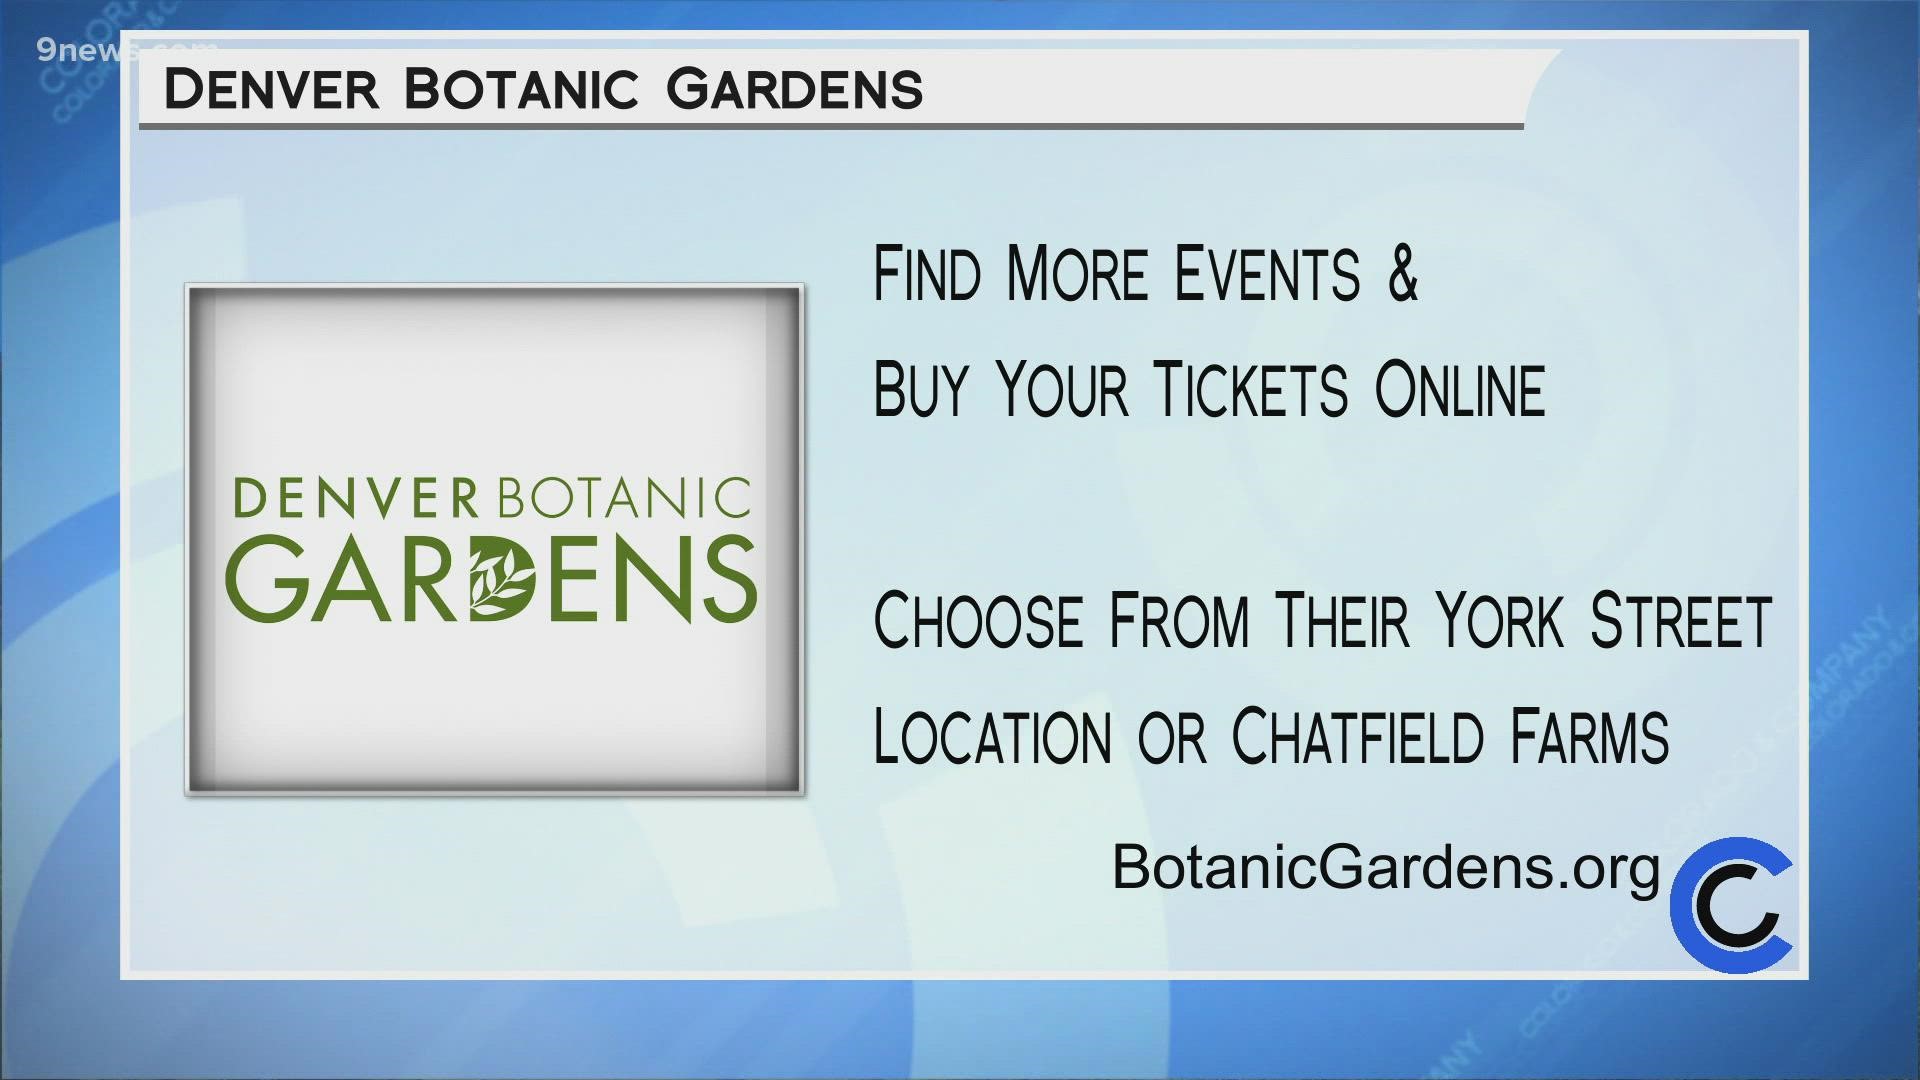 Find all the fall events happening at the Gardens this season at BotanicGardens.org.